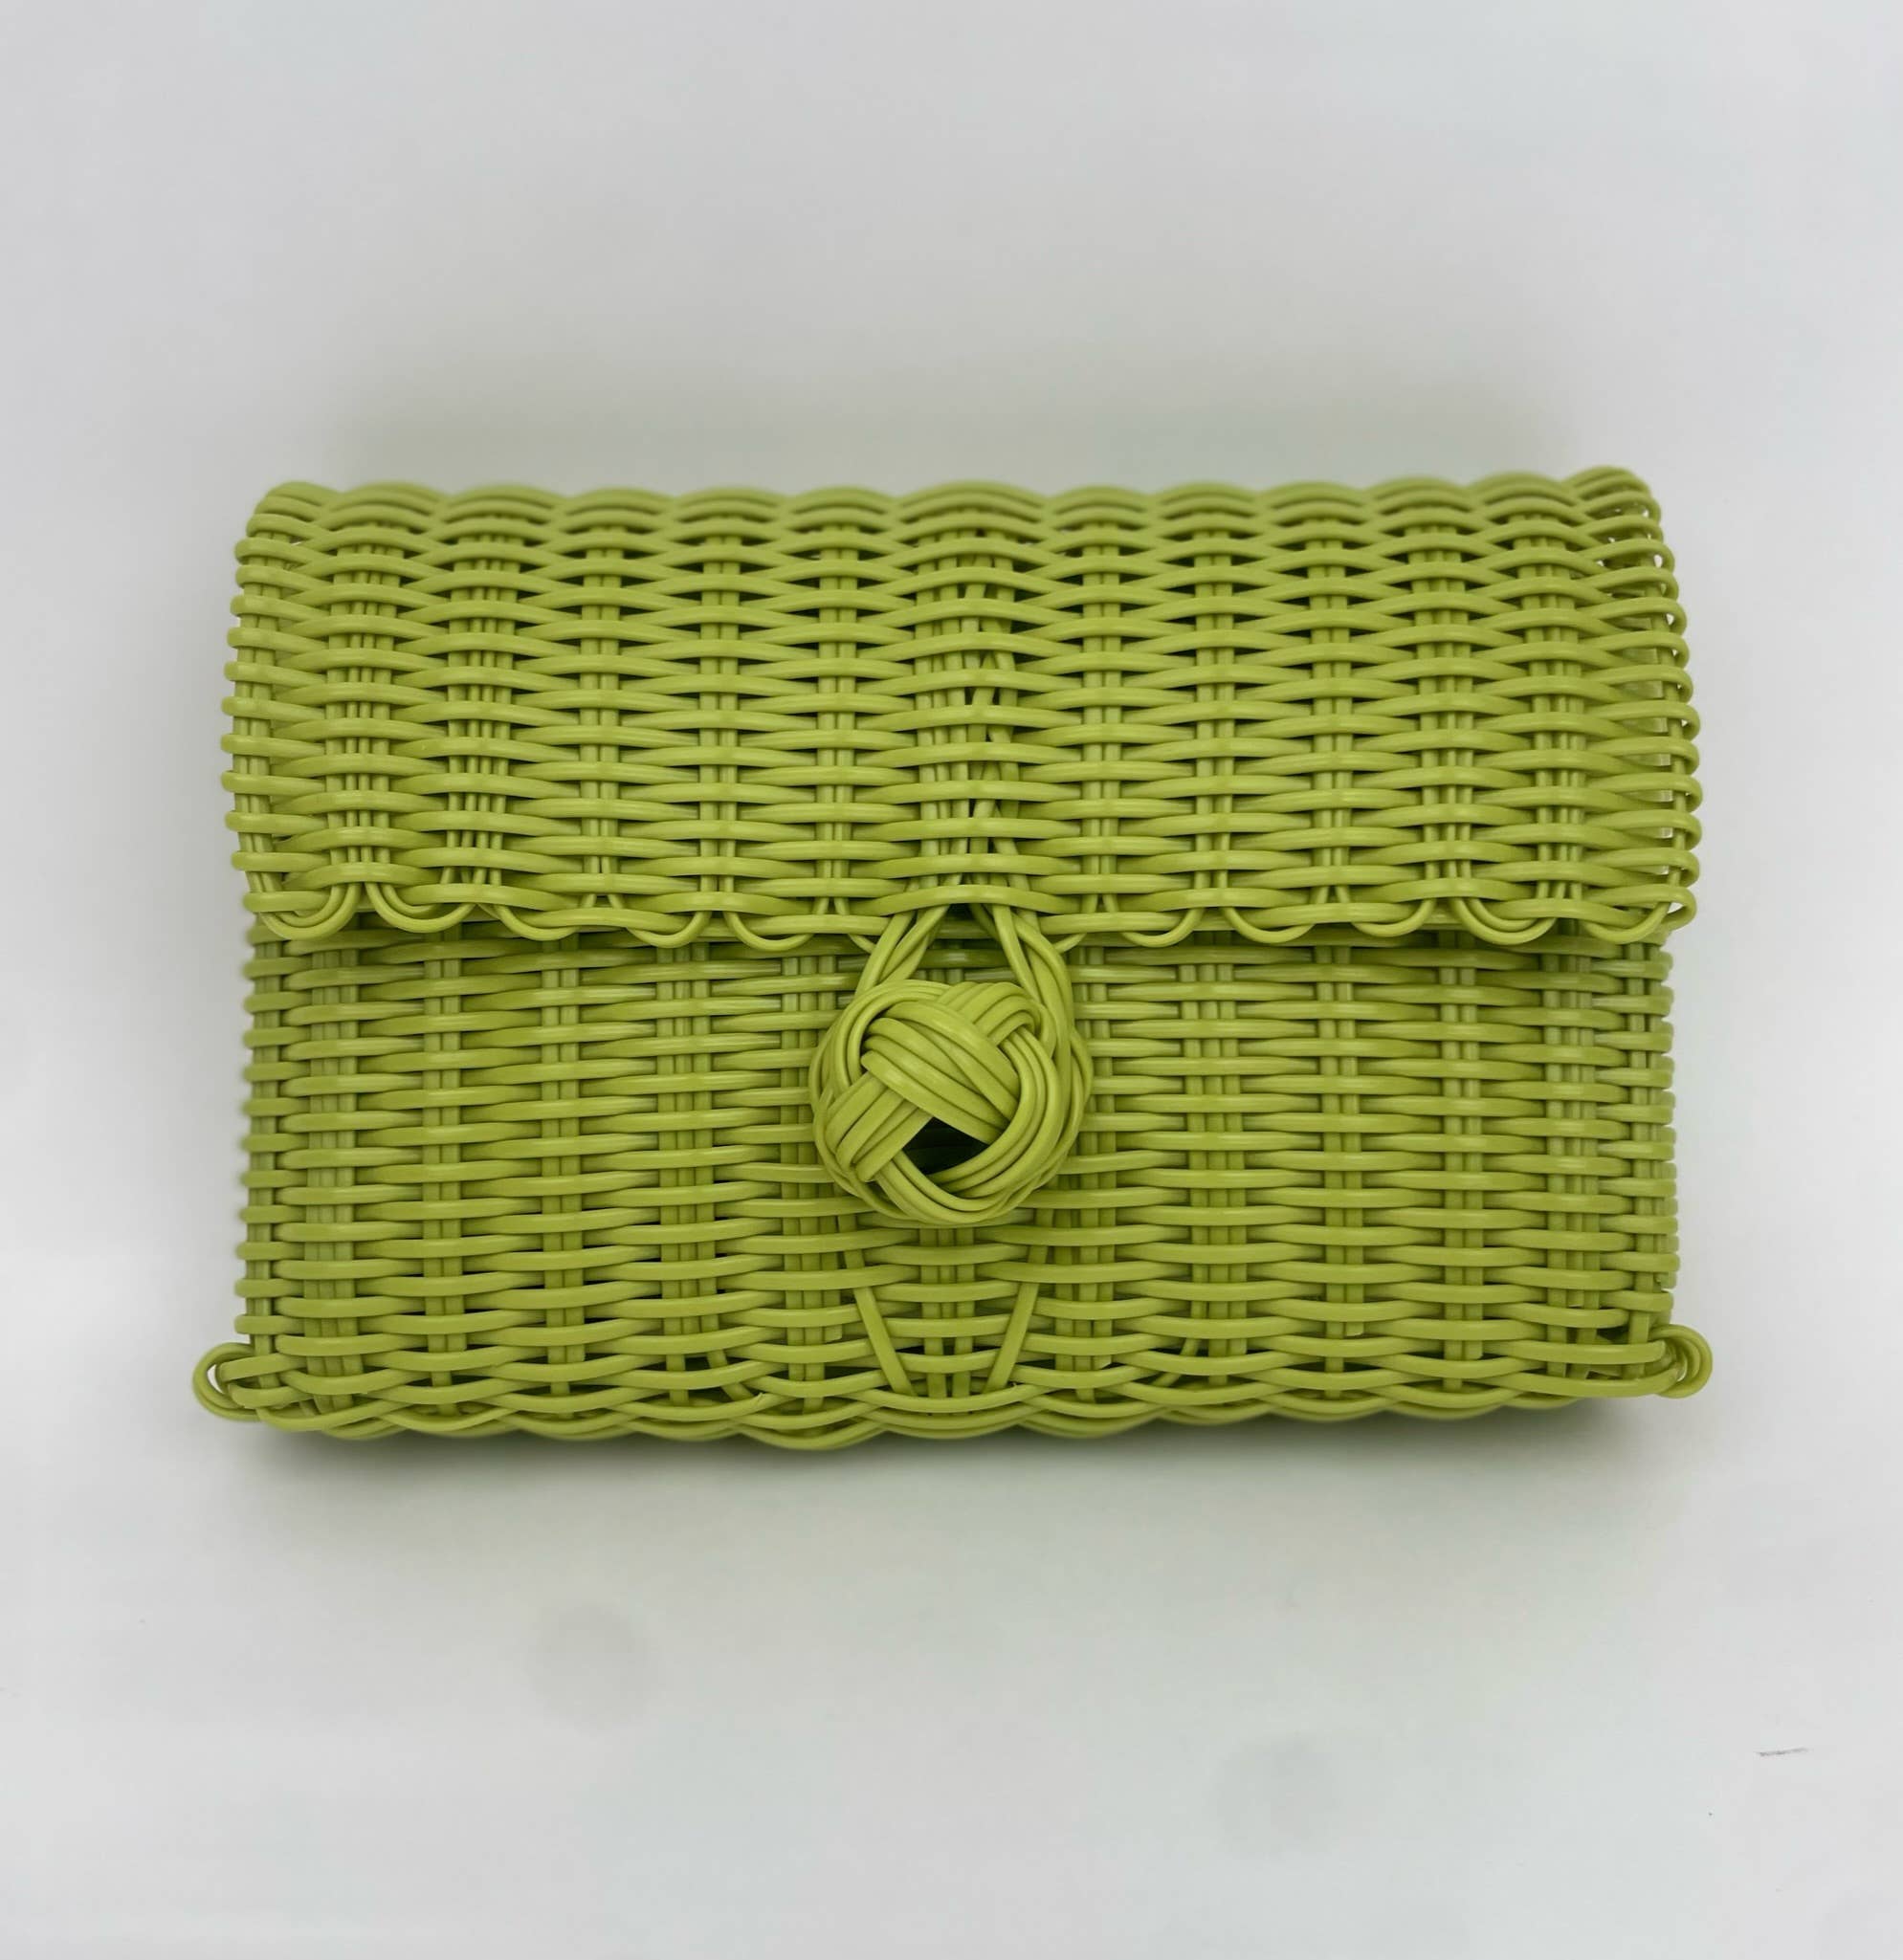 Fifth Day of Christmas my true love gave to me: Clutch by The Lilley Line